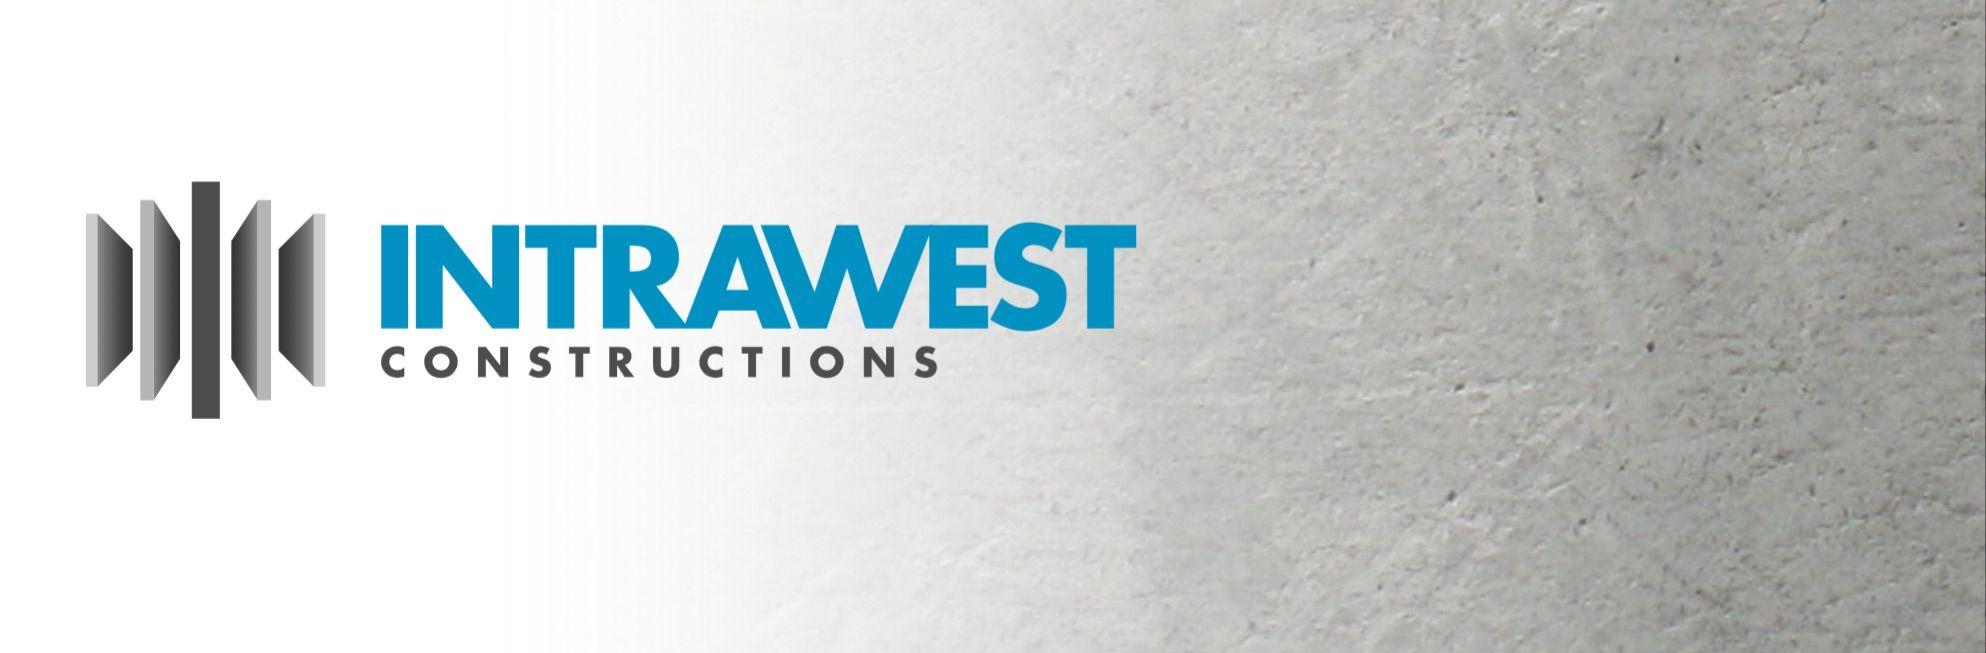 Intrawest Logo - commercial and domestic developments melbourne. Intrawest Constructions